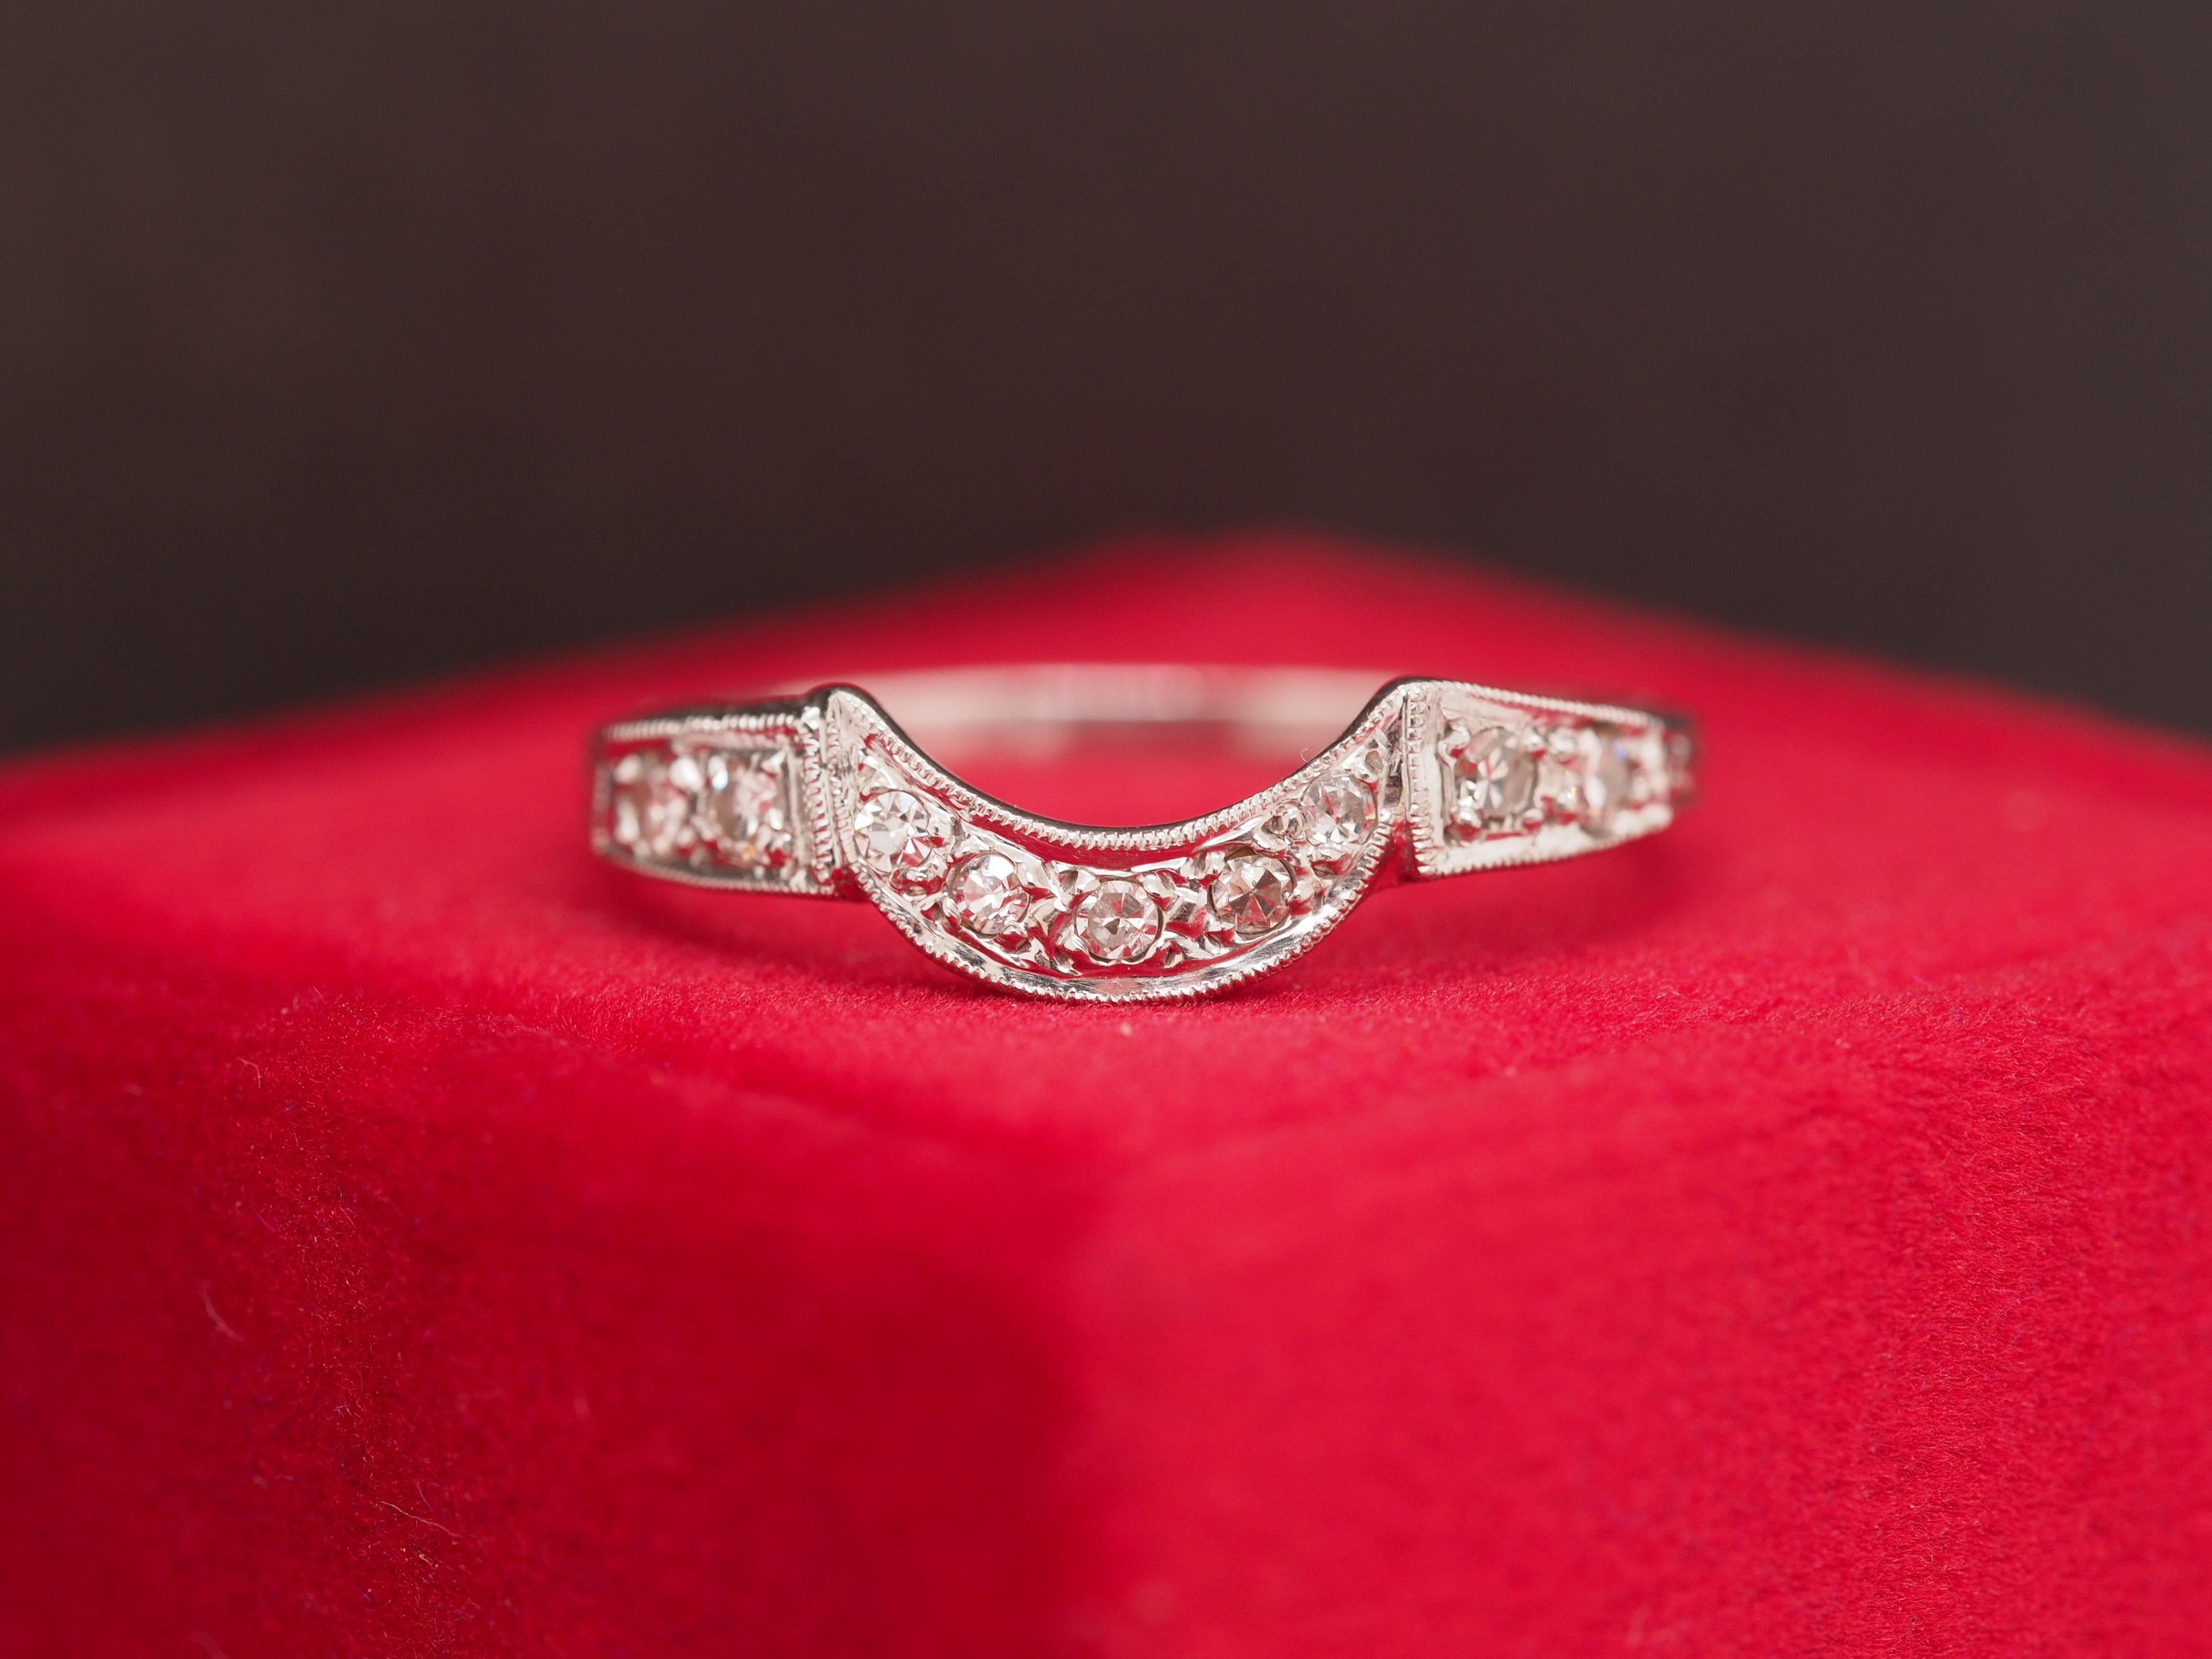 Year: 1940
Item Details:
Ring Size: 7.25
Metal Type: Platinum [Hallmarked, and Tested]
Weight: 2.6 grams
Diamond Details
Center Diamond: .25cttw
Cut: Transitional Cut
Color: G
Clarity: VS
Band Width: mm
Condition: Excellent